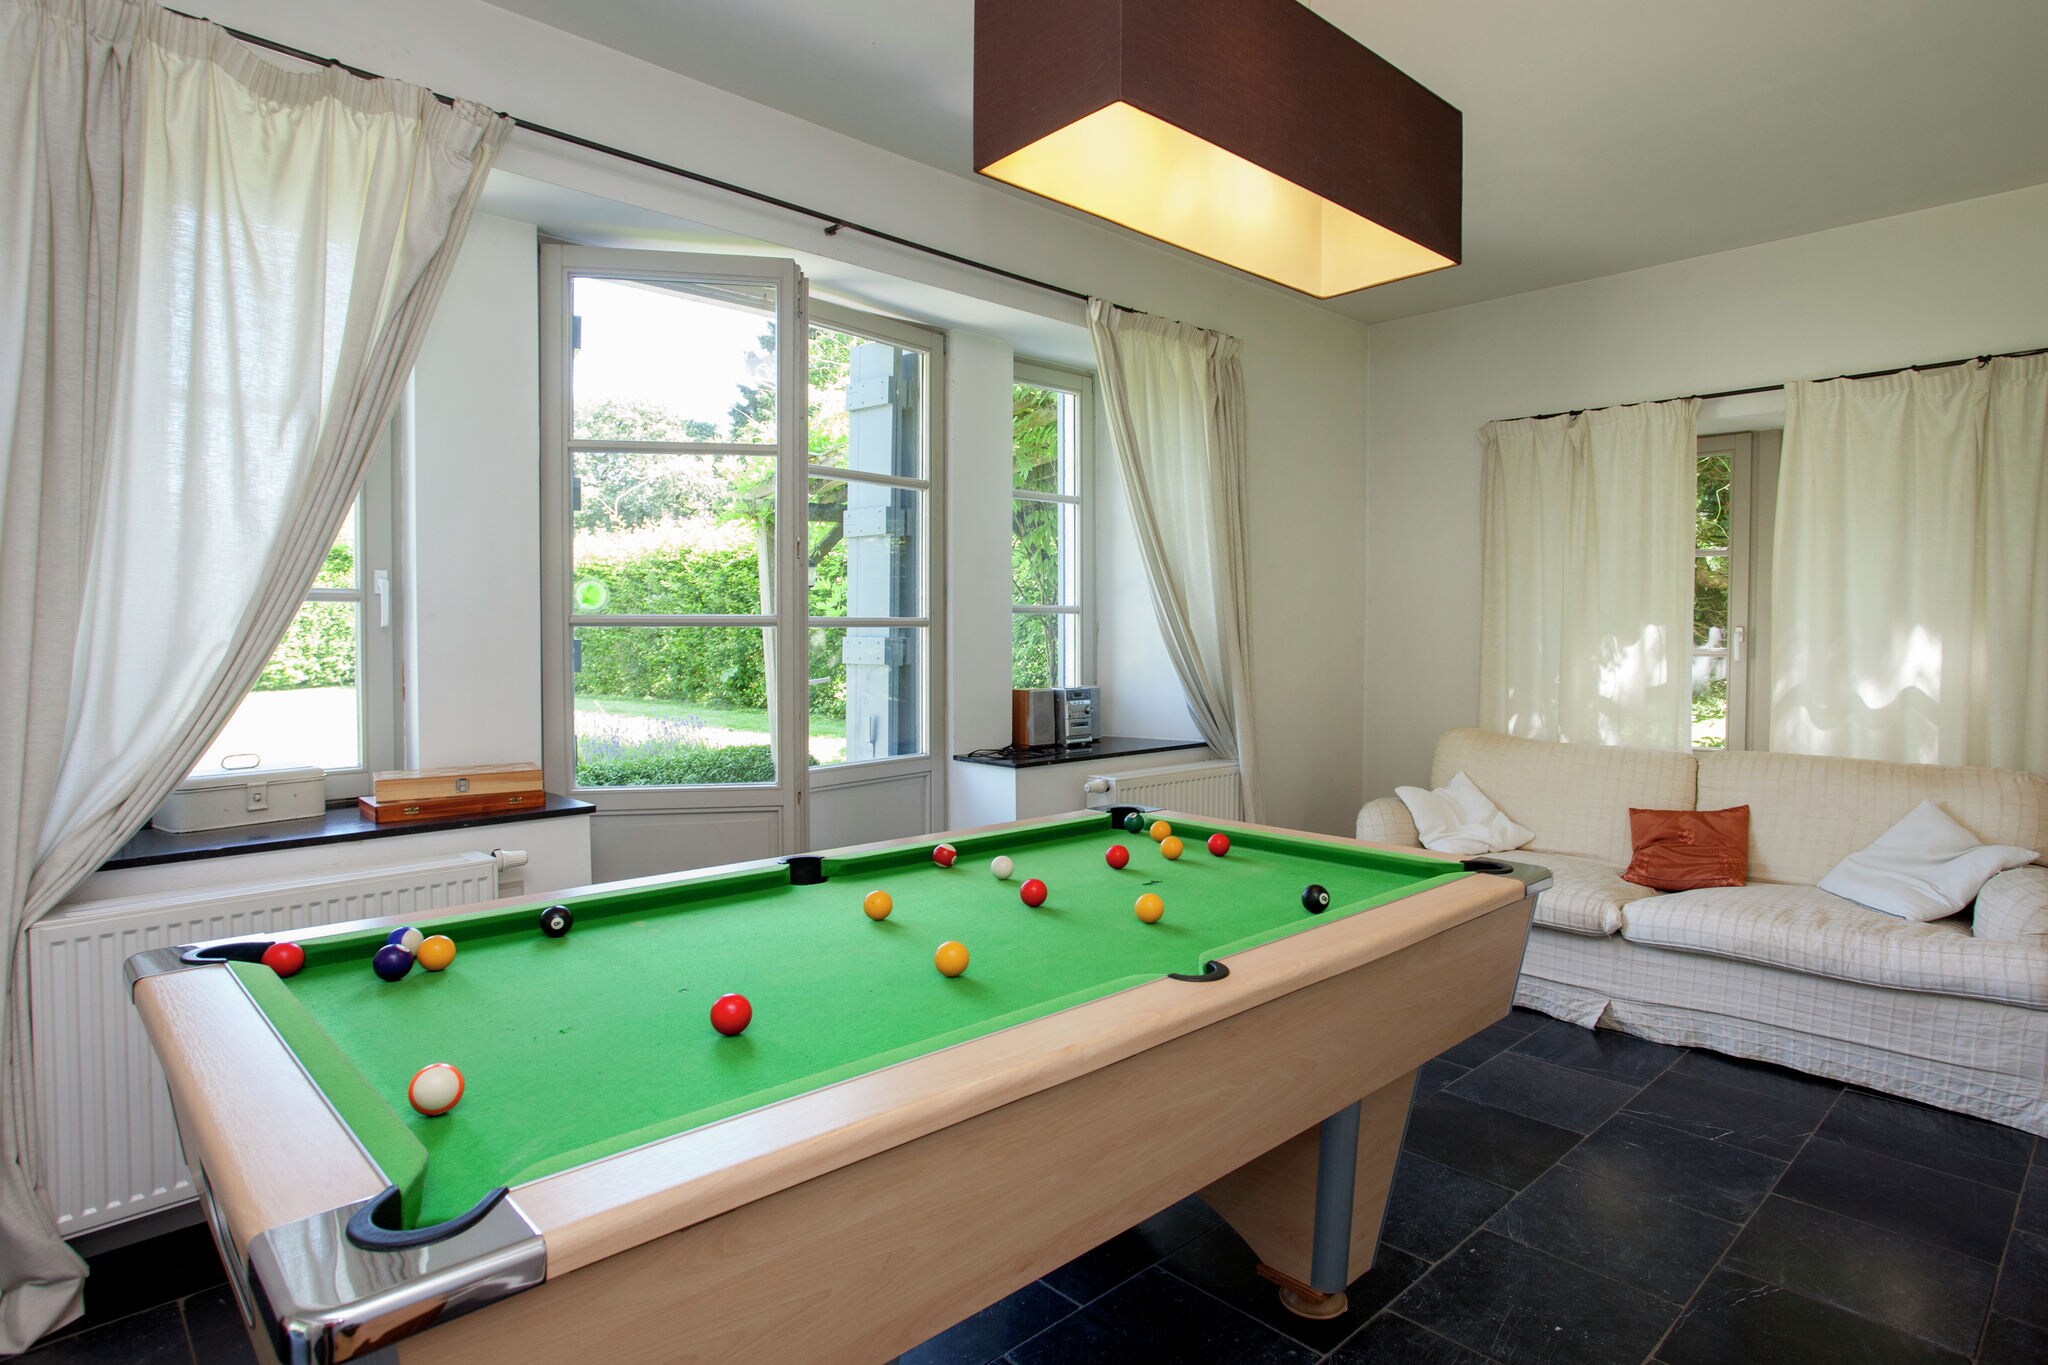 With billiards, table tennis and collection of modern art in a rural setting